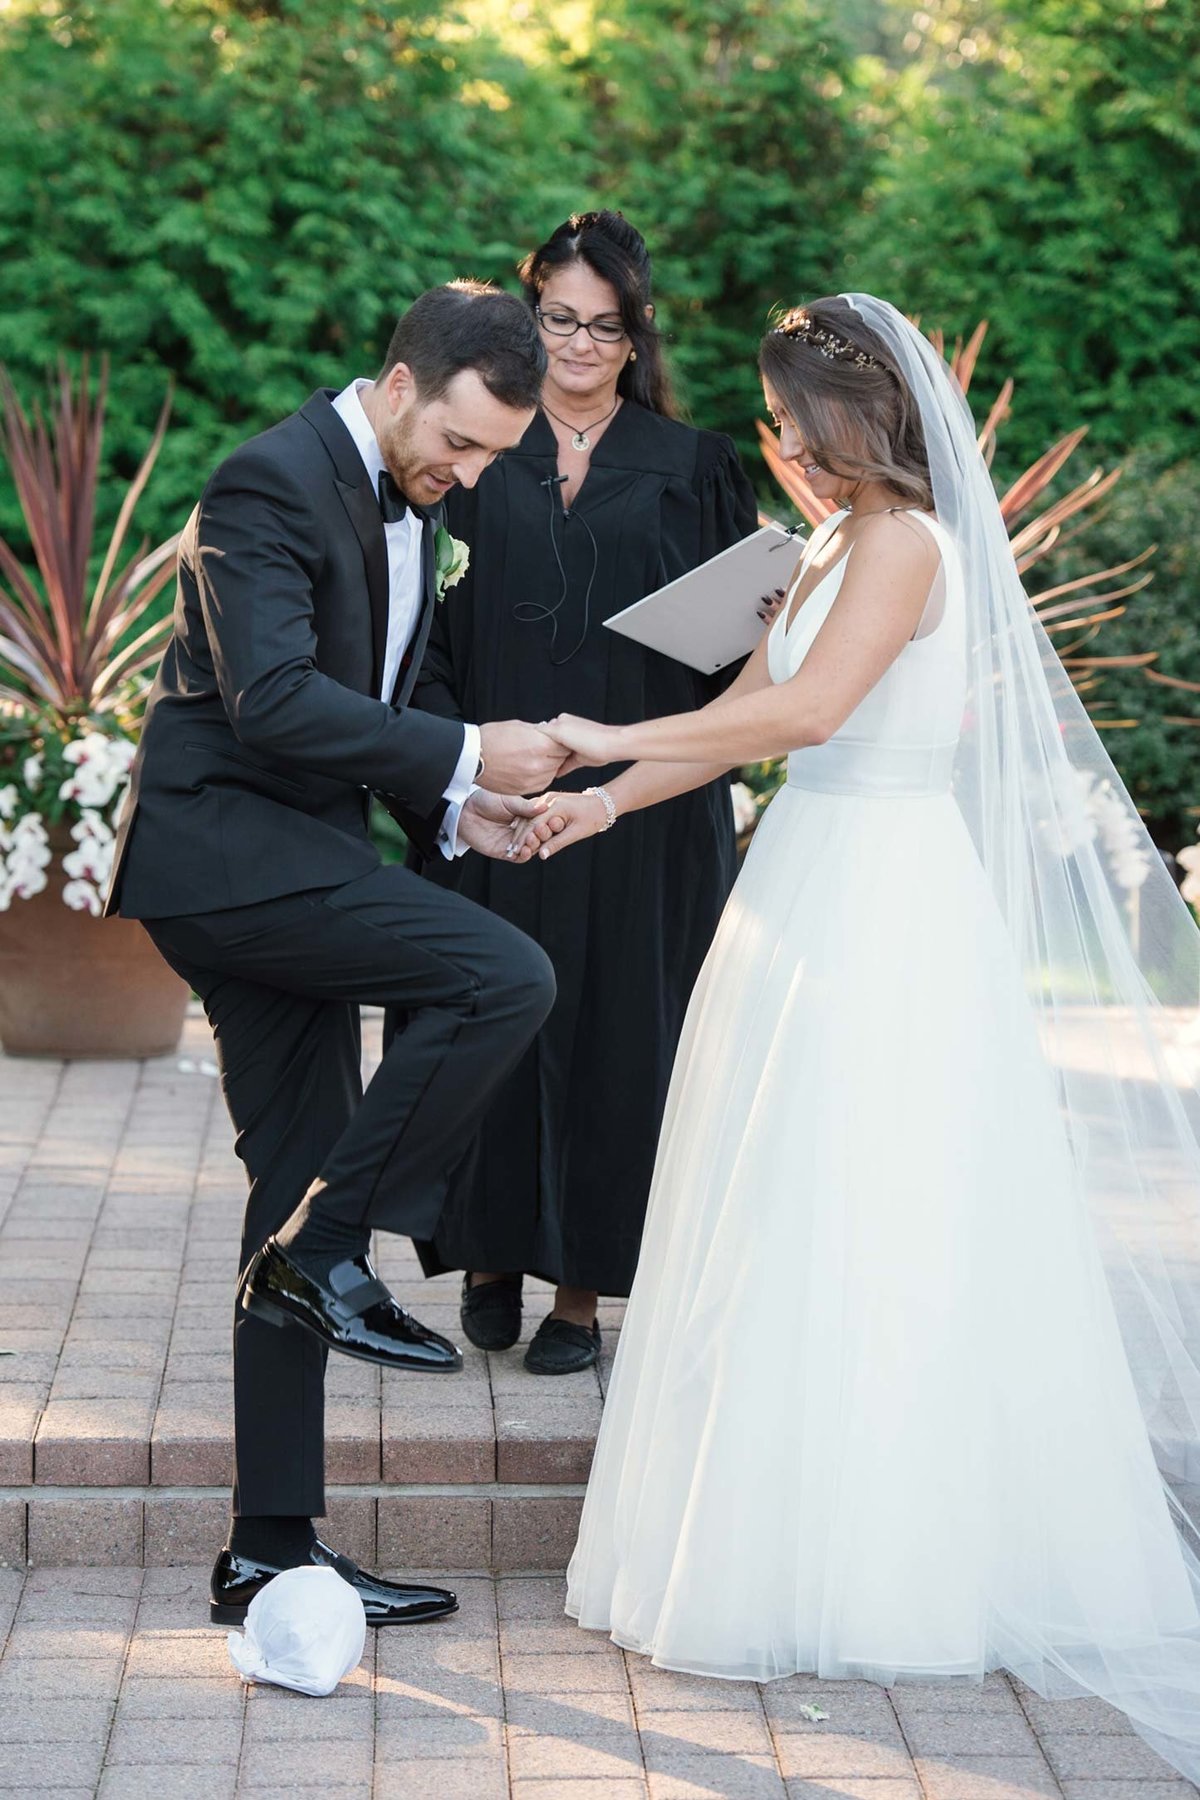 Groom stepping on glass at altar at Stonebridge Country Club